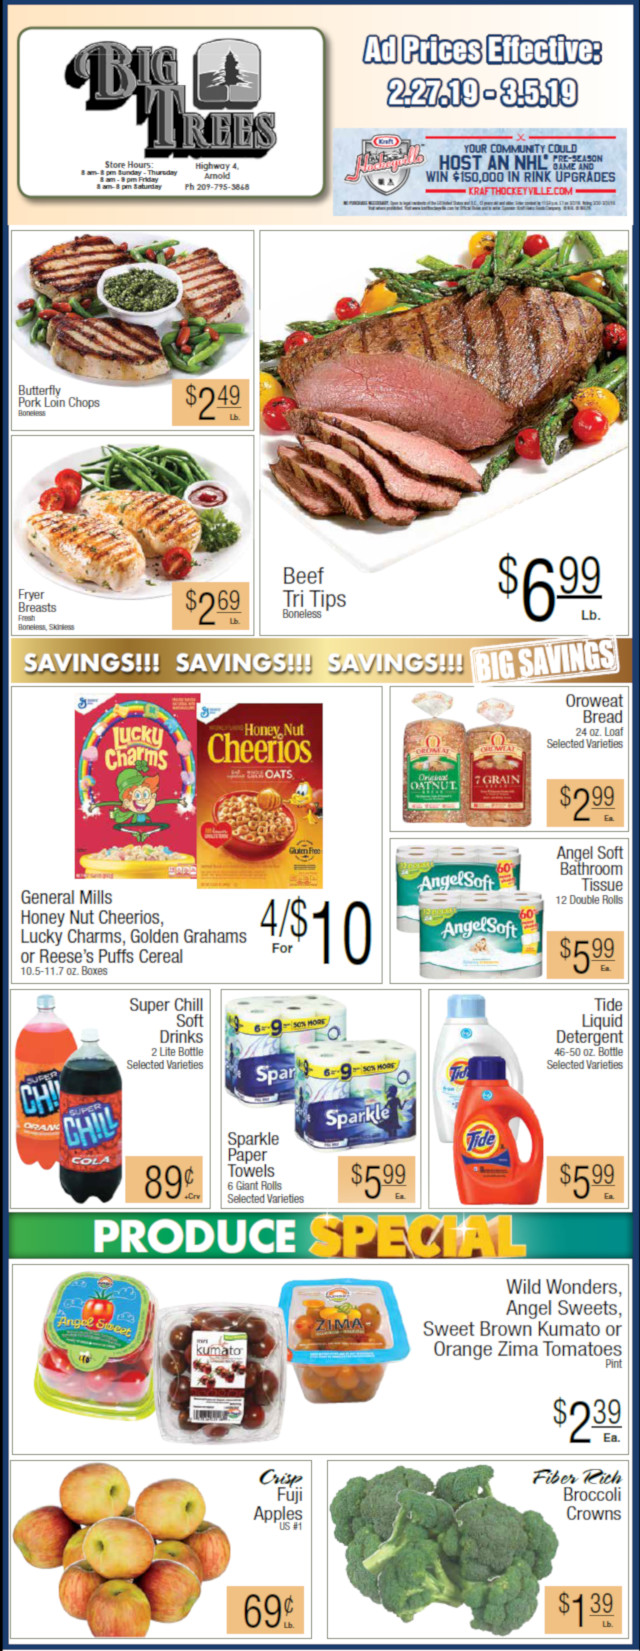 Big Trees Market Weekly Ad & Grocery Specials Through March 5th